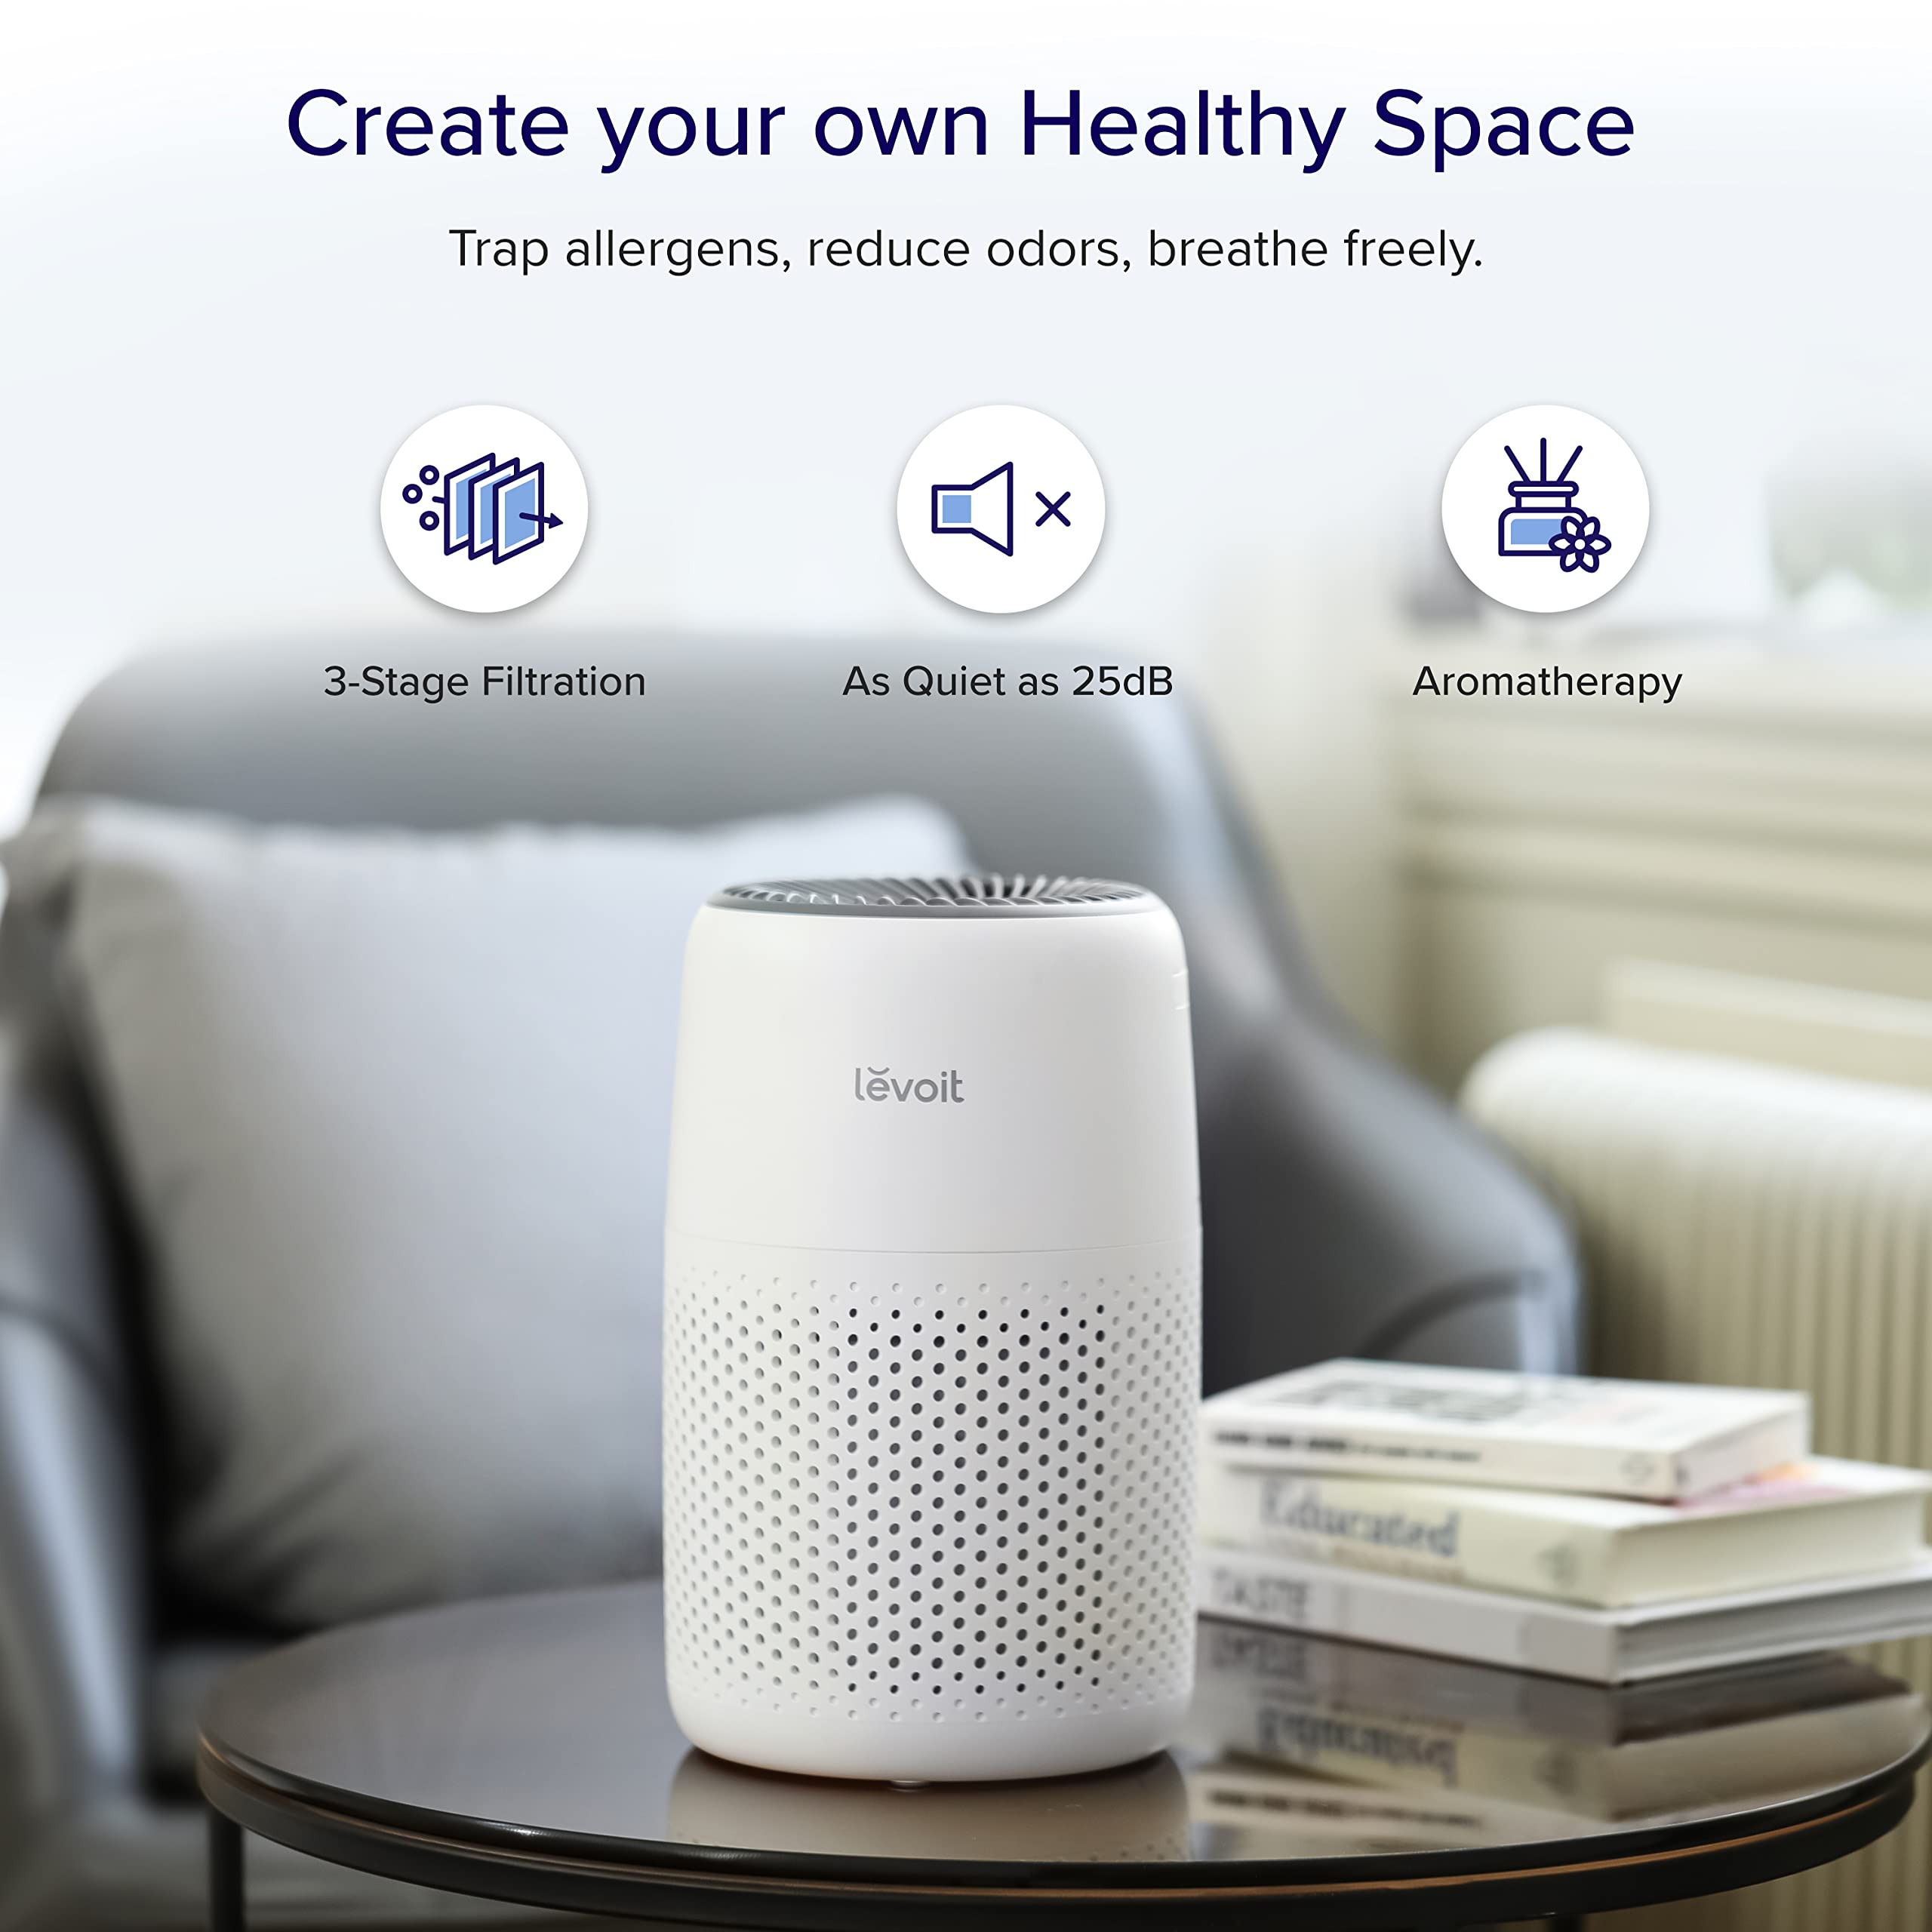 Breathe Deep With Confidence: Why You Need The Nispira Air Purifier For Healthier Air